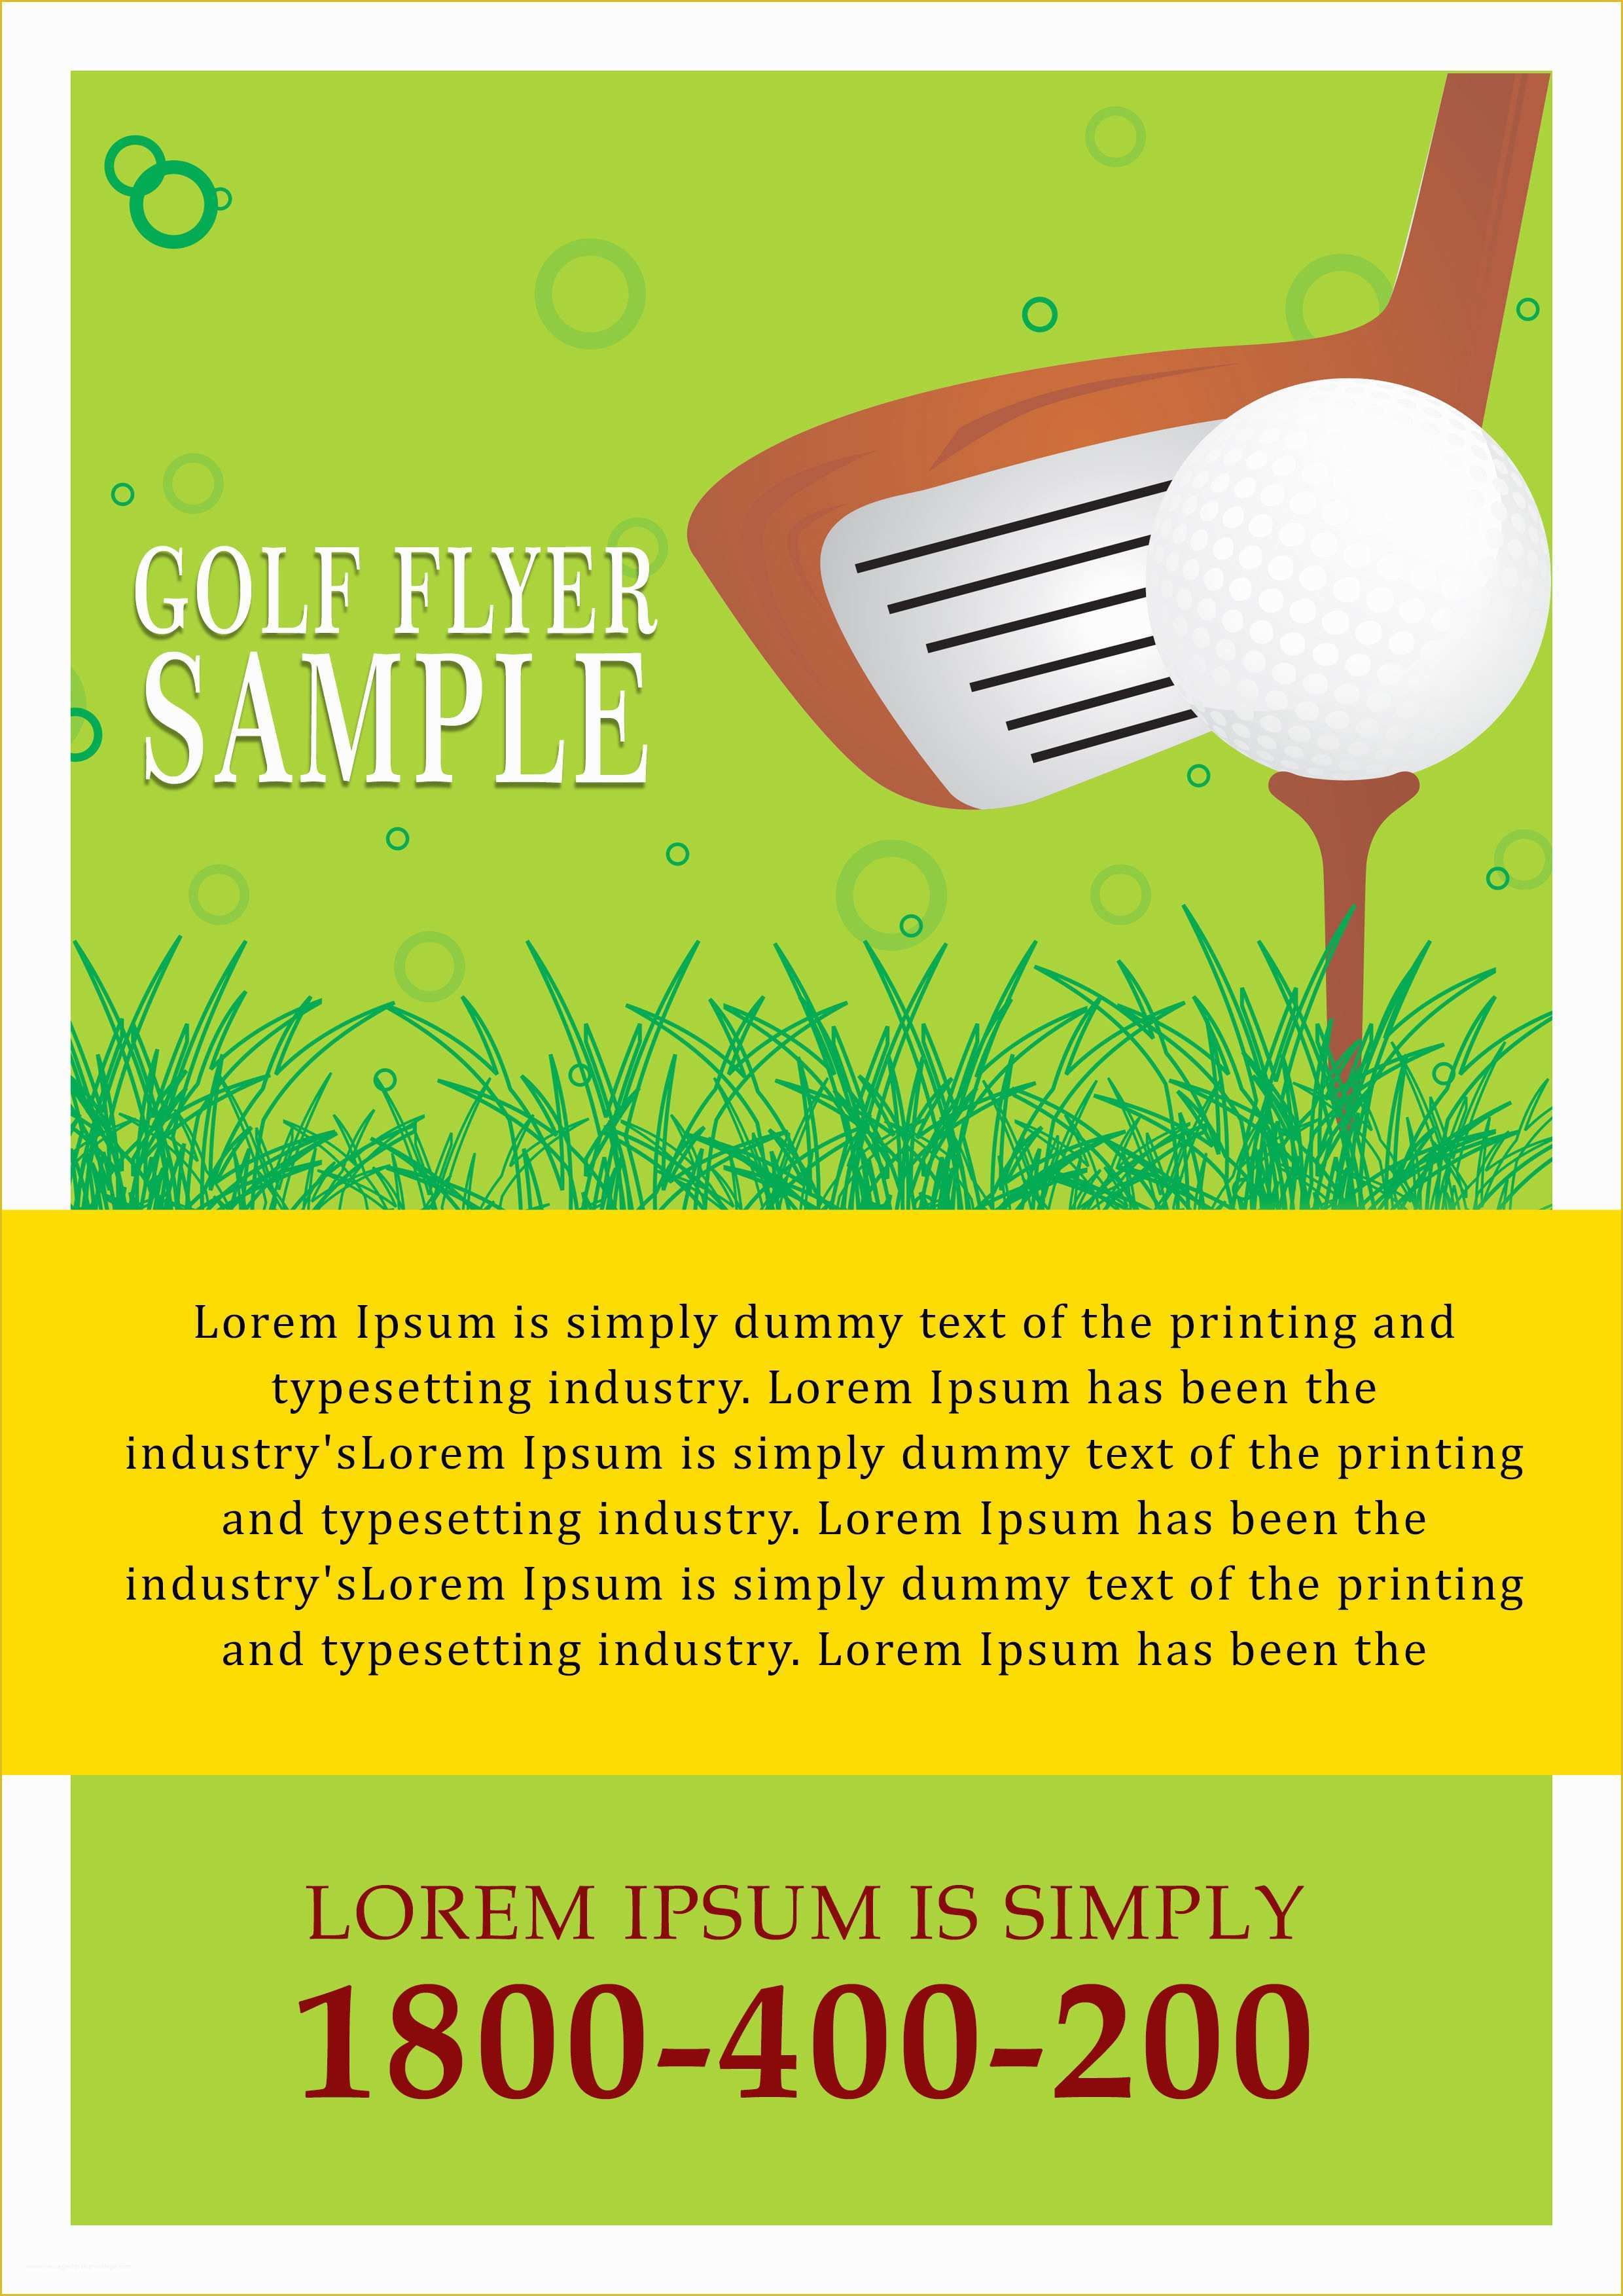 Free Donation Flyer Template Of 15 Free Golf tournament Flyer Templates Fundraiser